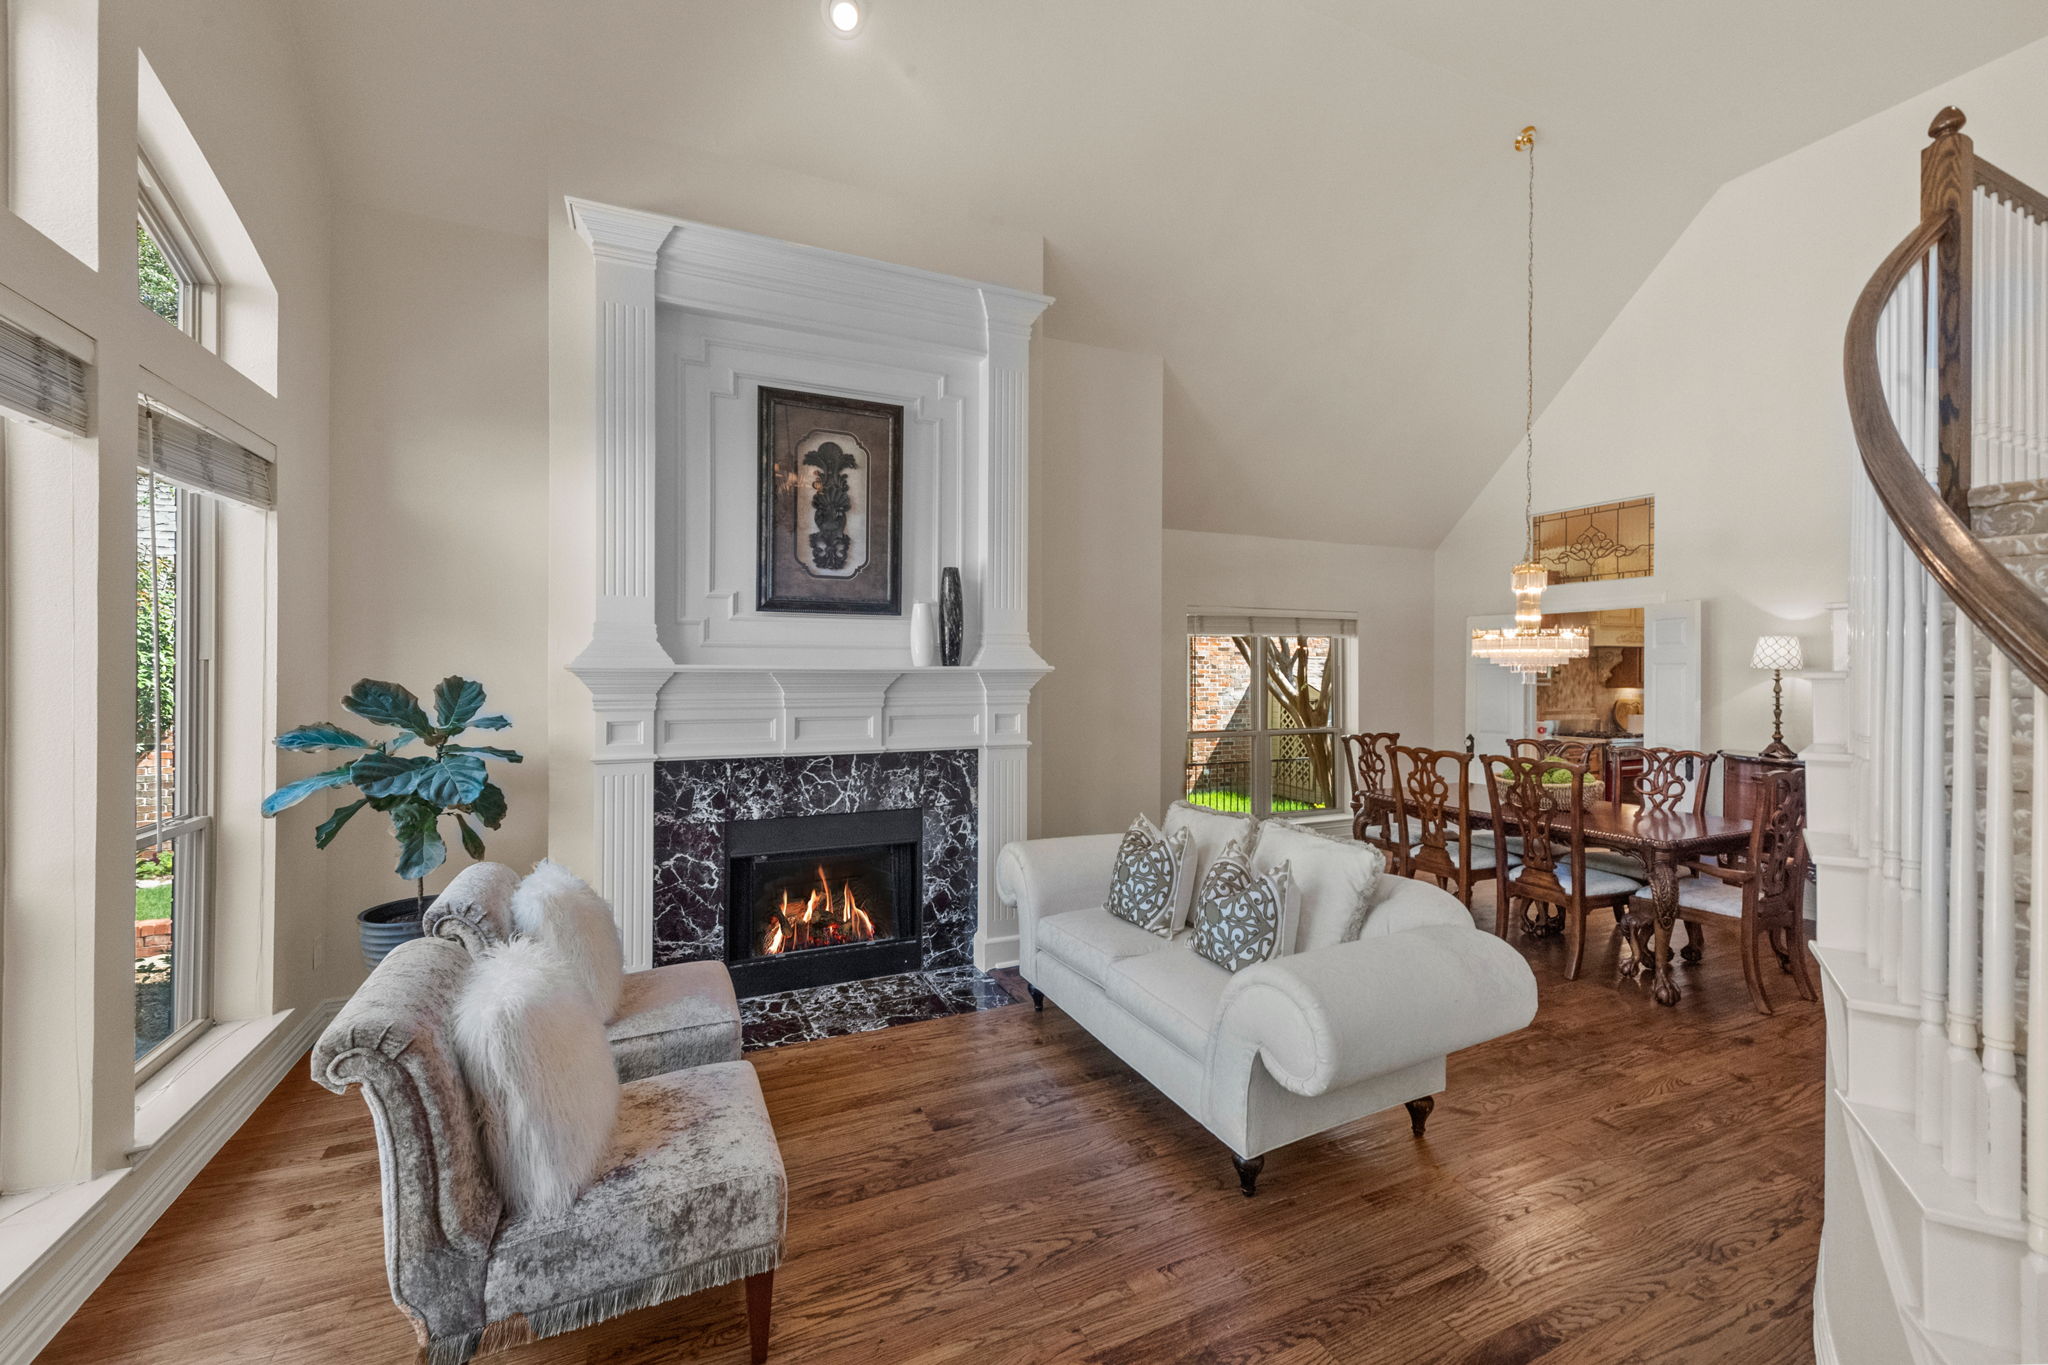 The formal living has a beautiful gas fireplace and is open to the formal dining.